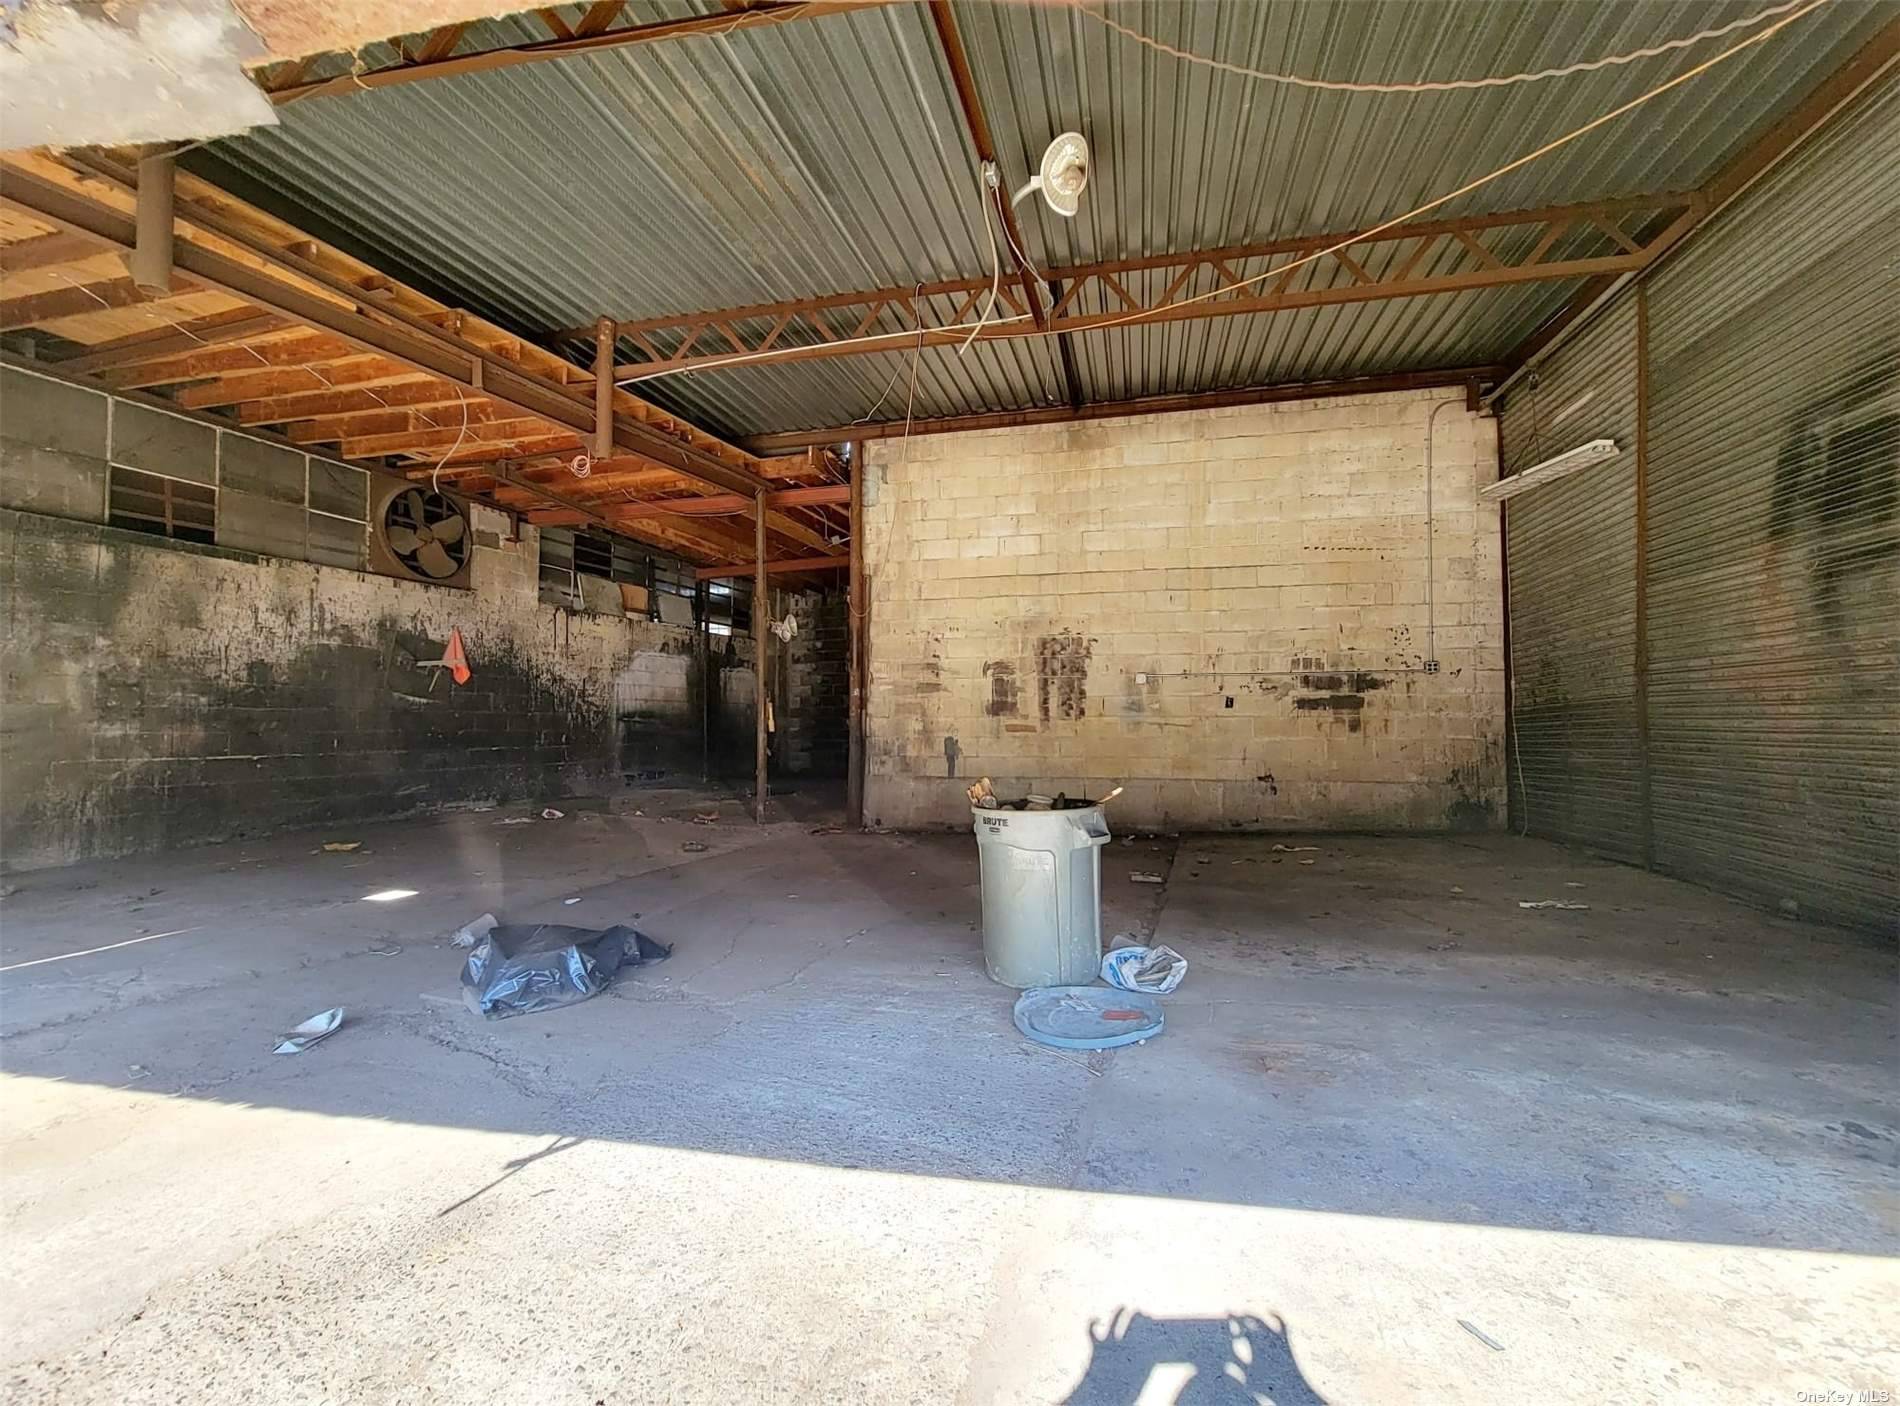 Welcome to our real estate rental listing for a warehouse commercial space.